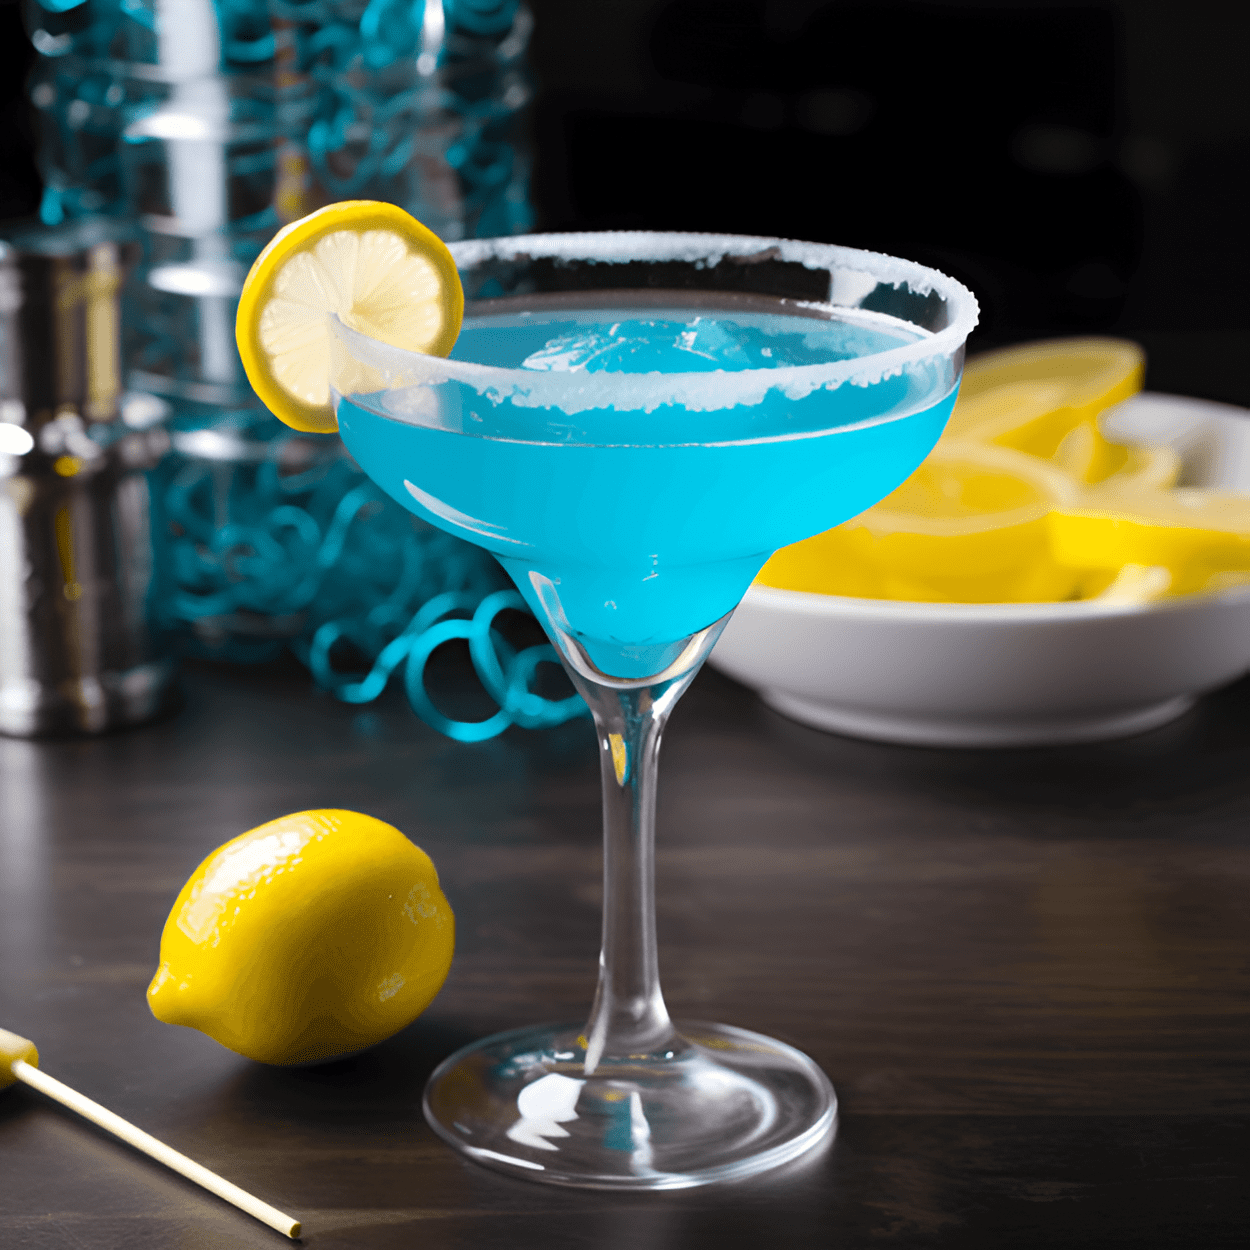 Sour Patch Kid Cocktail Recipe - The Sour Patch Kid cocktail is a delightful blend of sweet, sour, and fruity flavors. The sweetness of the simple syrup and the sourness of the lemon juice create a perfect balance, while the fruity flavors of the vodka and the blue curacao add depth and complexity. The result is a cocktail that's refreshing, tangy, and irresistibly delicious.